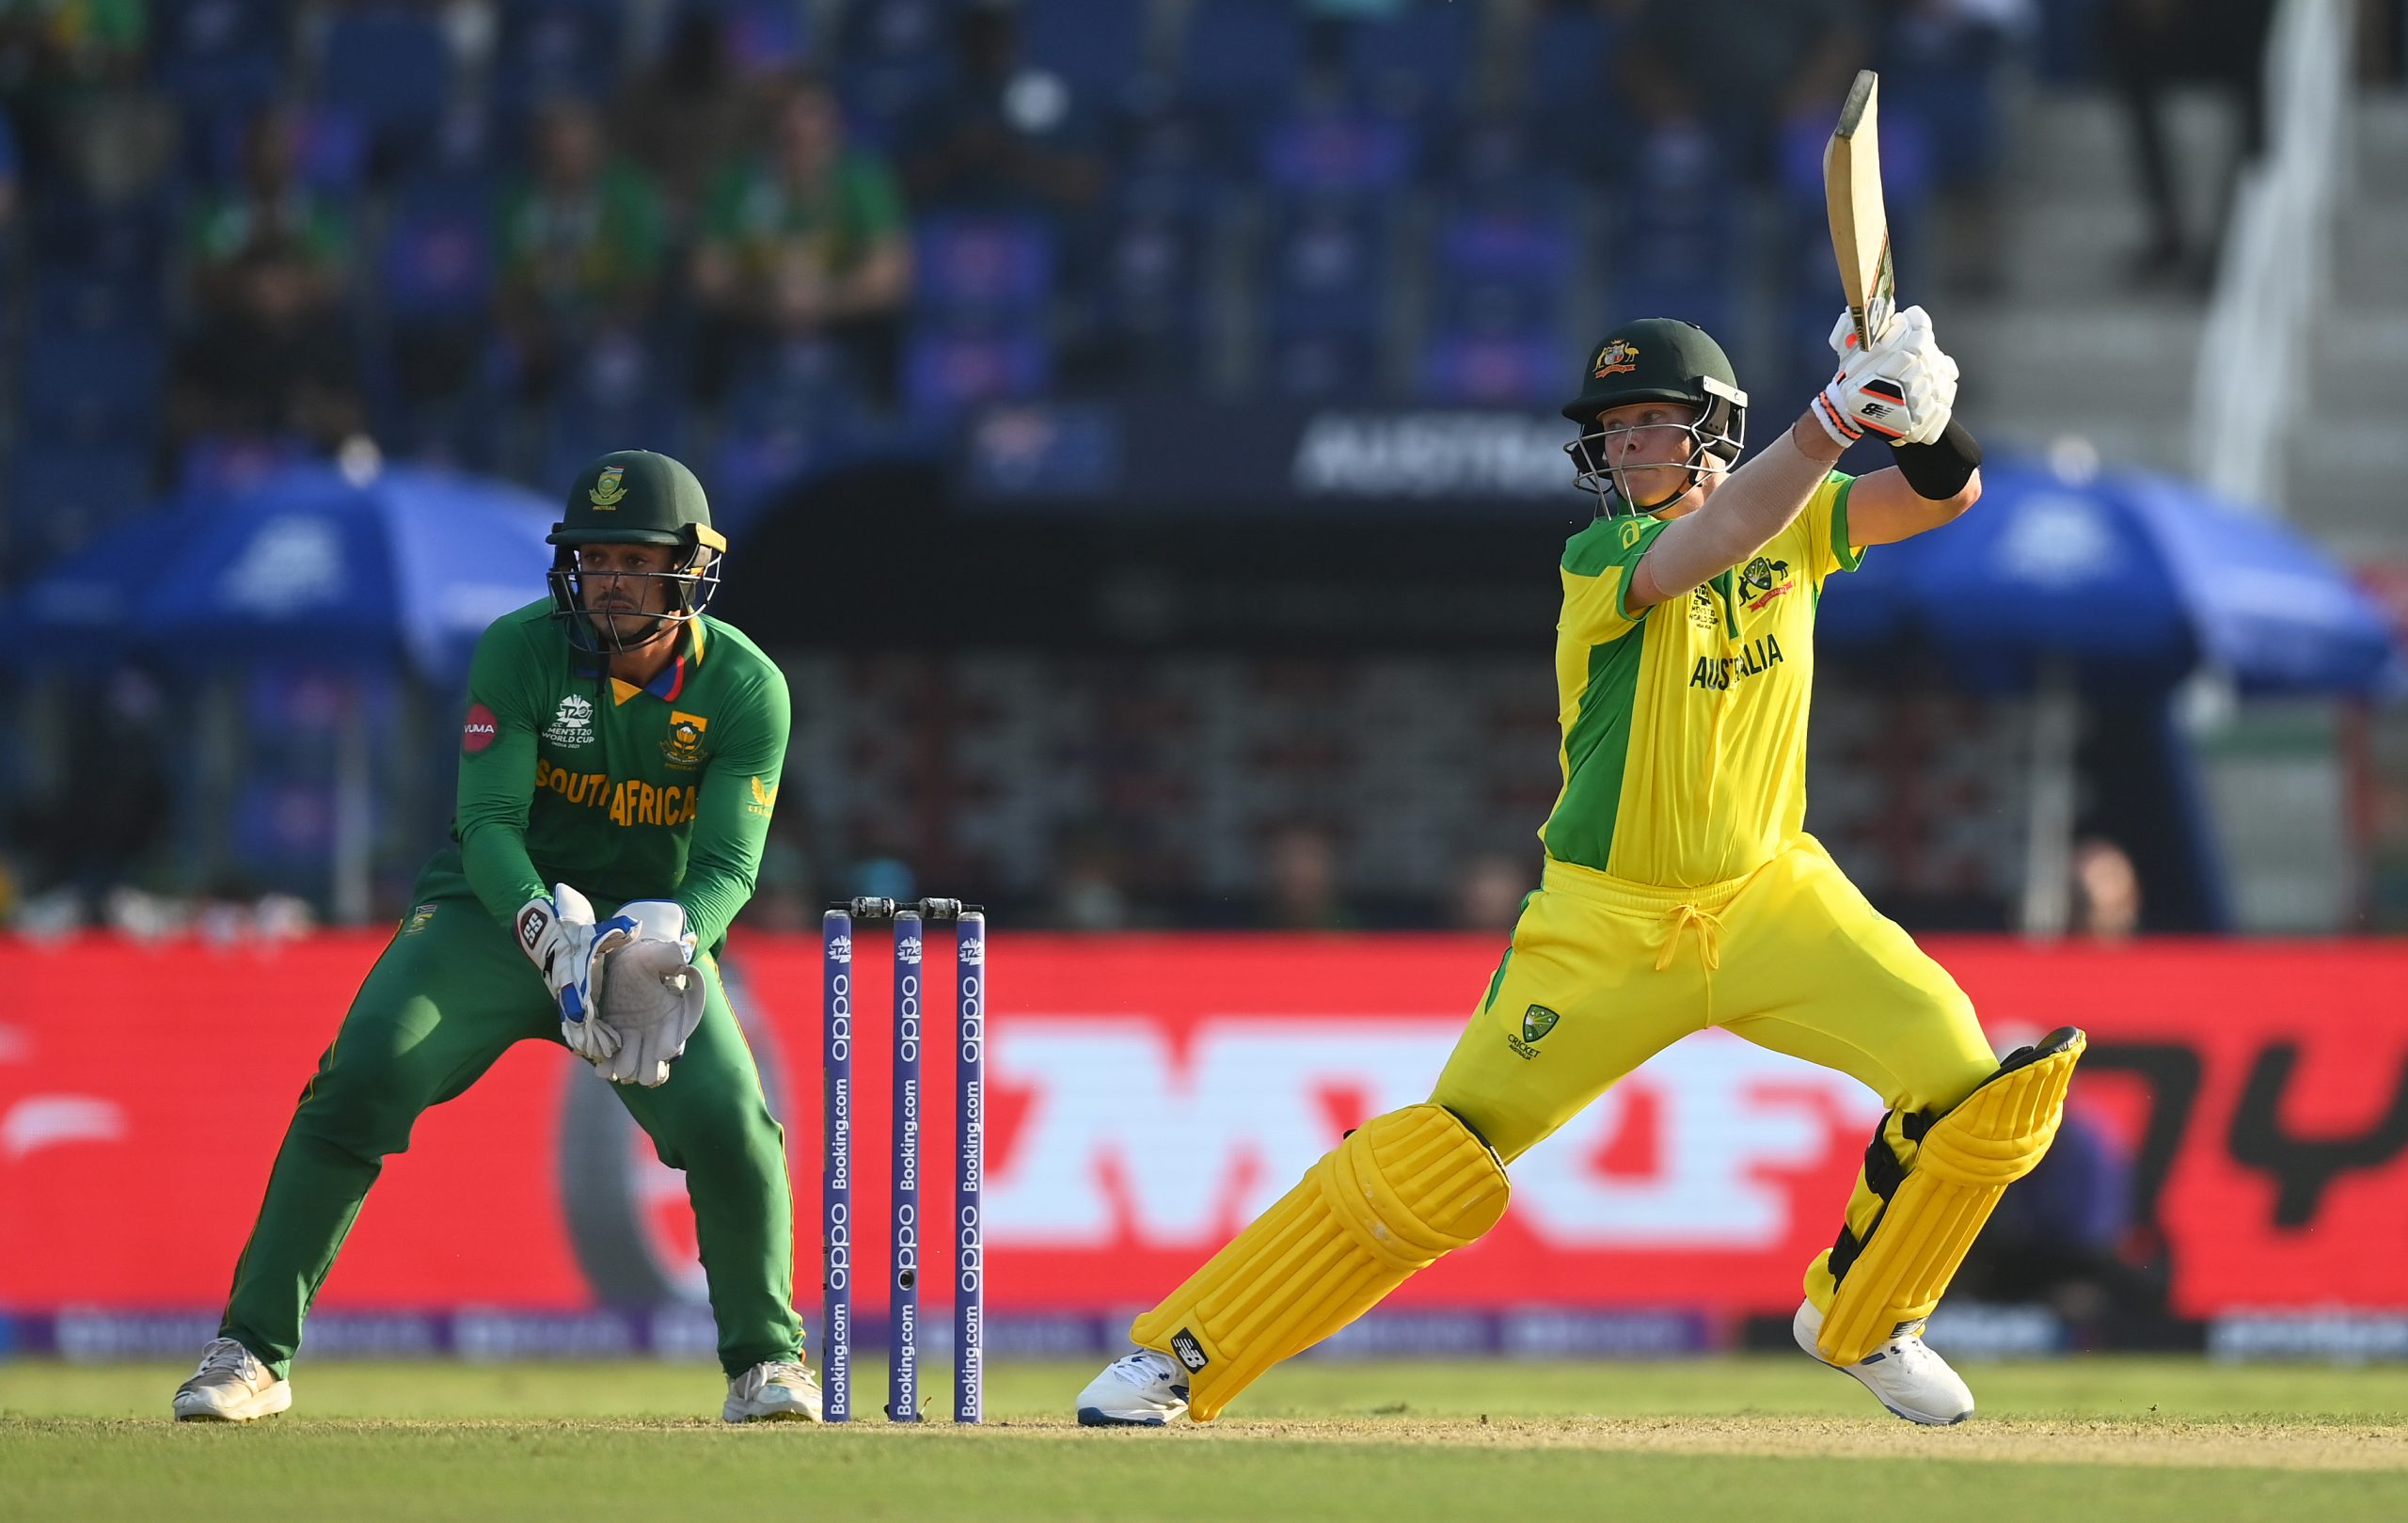 Abu Dhabi Australia beat South Africa in the crucial match of the T20 World Cup.